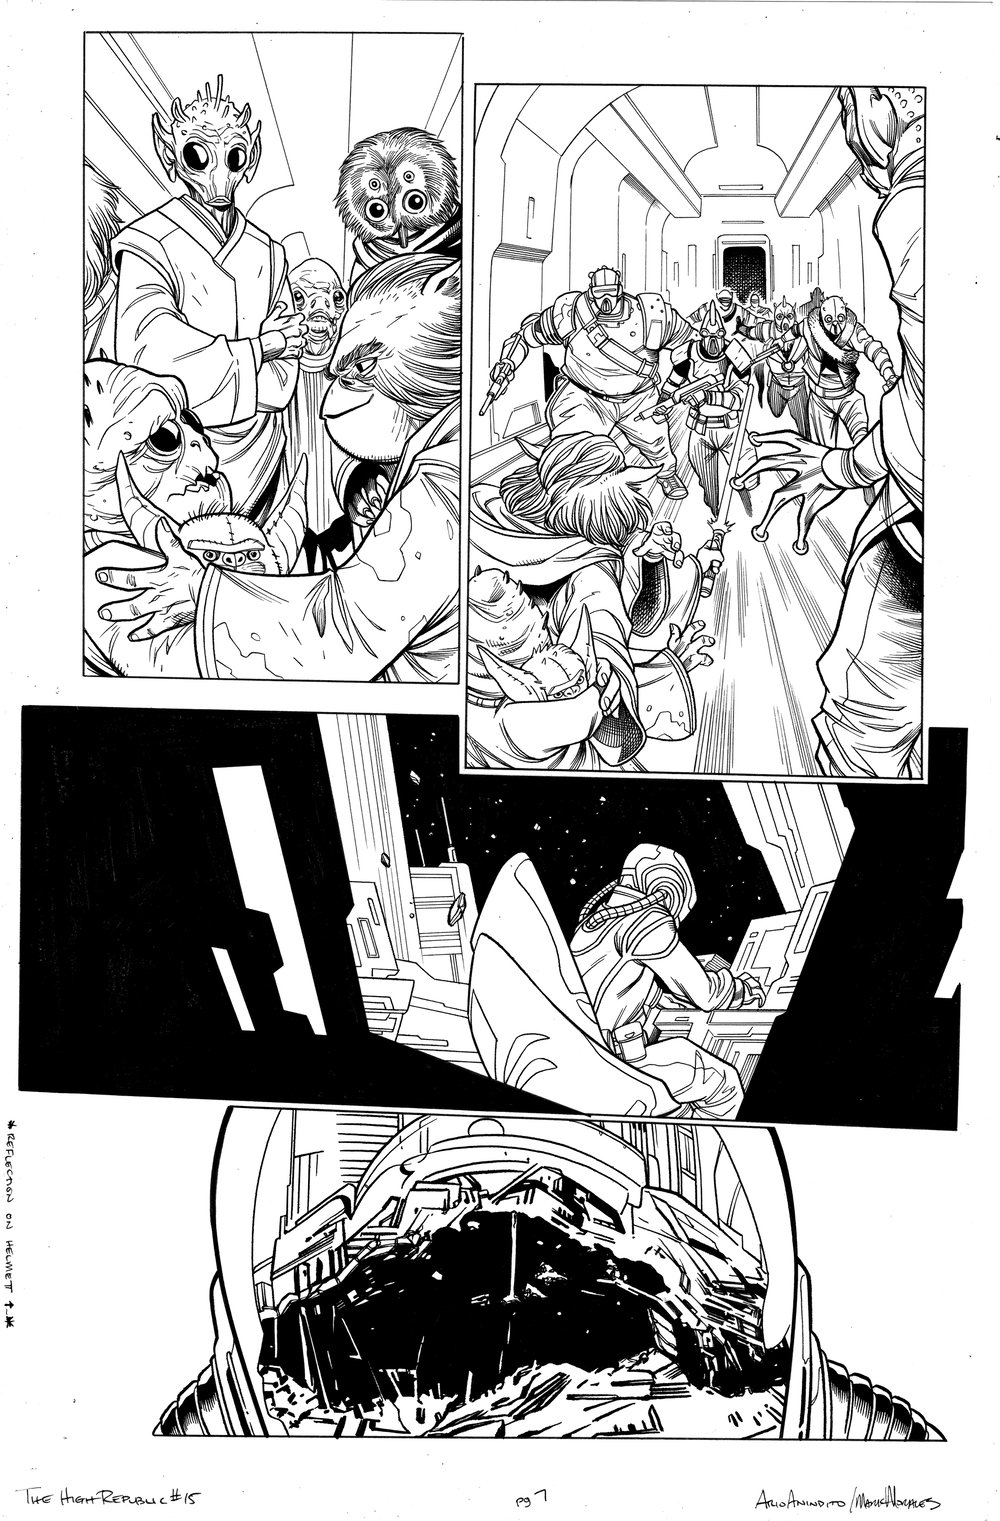 Image of Star Wars: The High Republic #15 PG 7